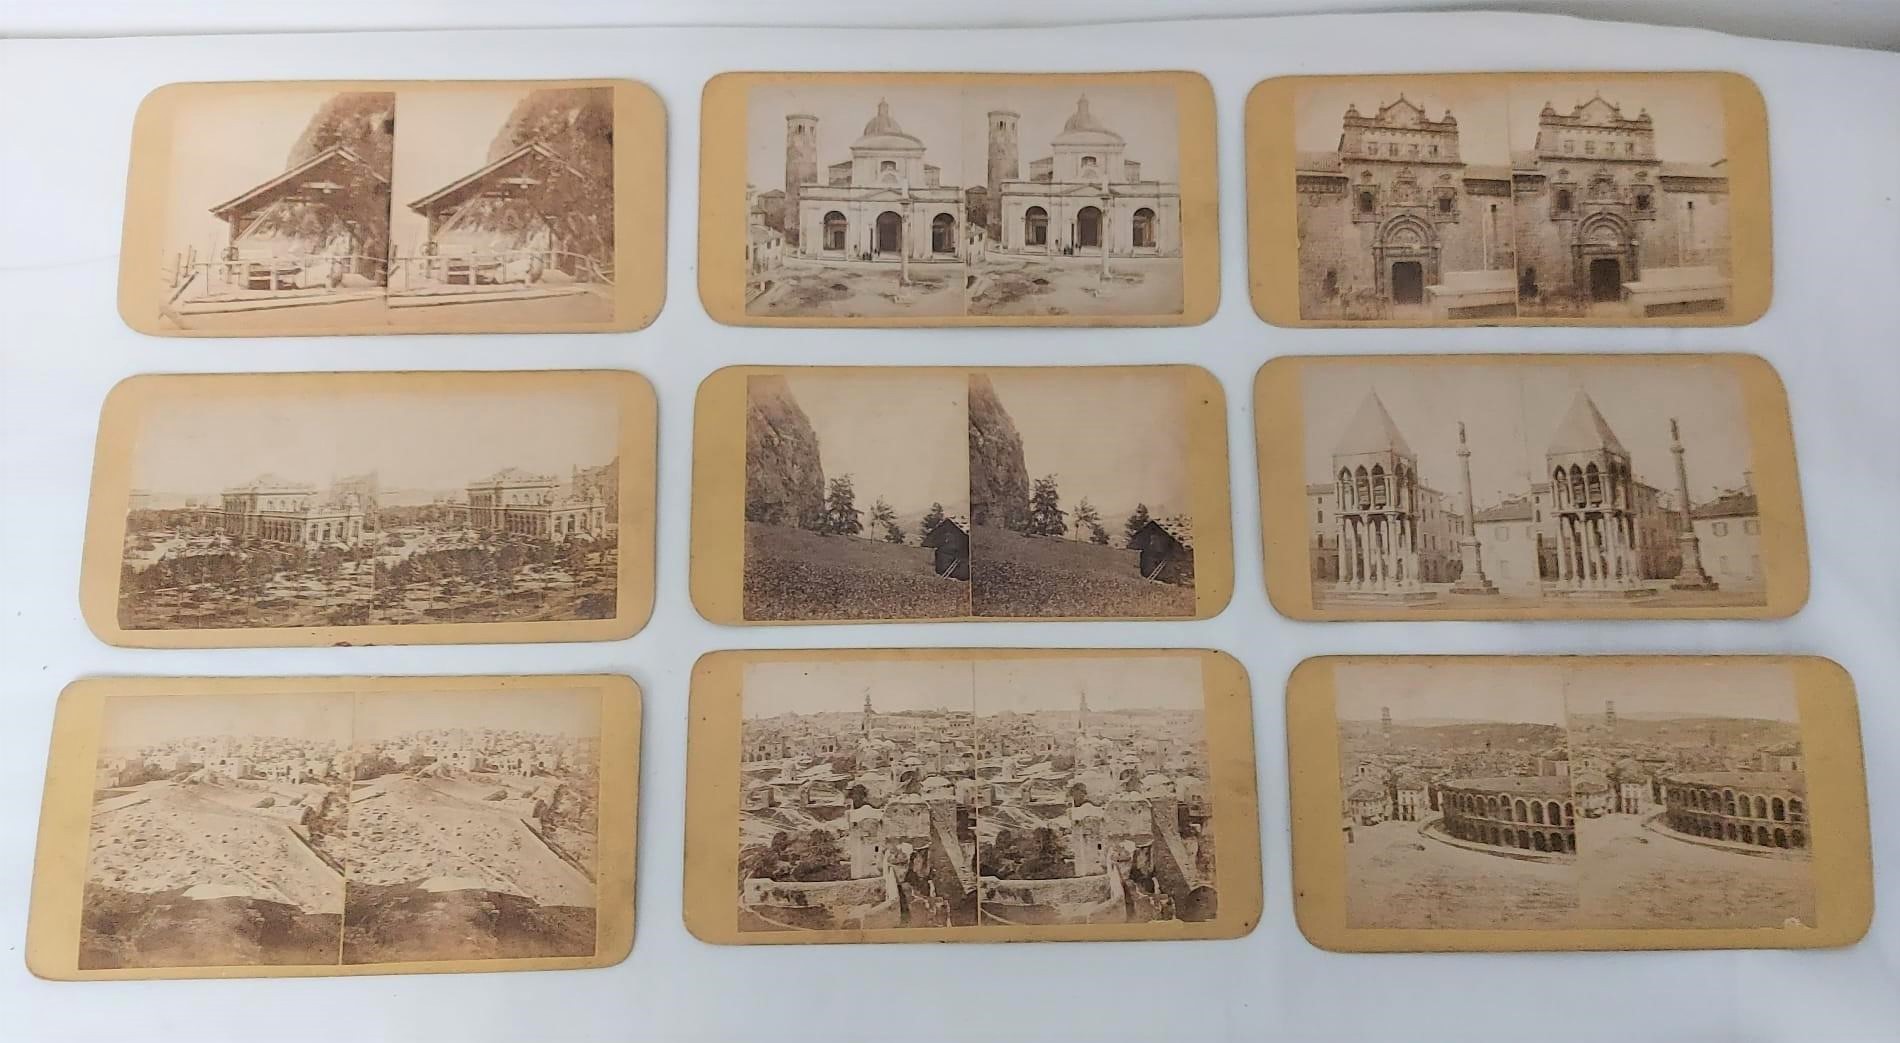 35 CARDS FROM THE 19TH CENTURY, YEARS 1876, 1877 AND 1878